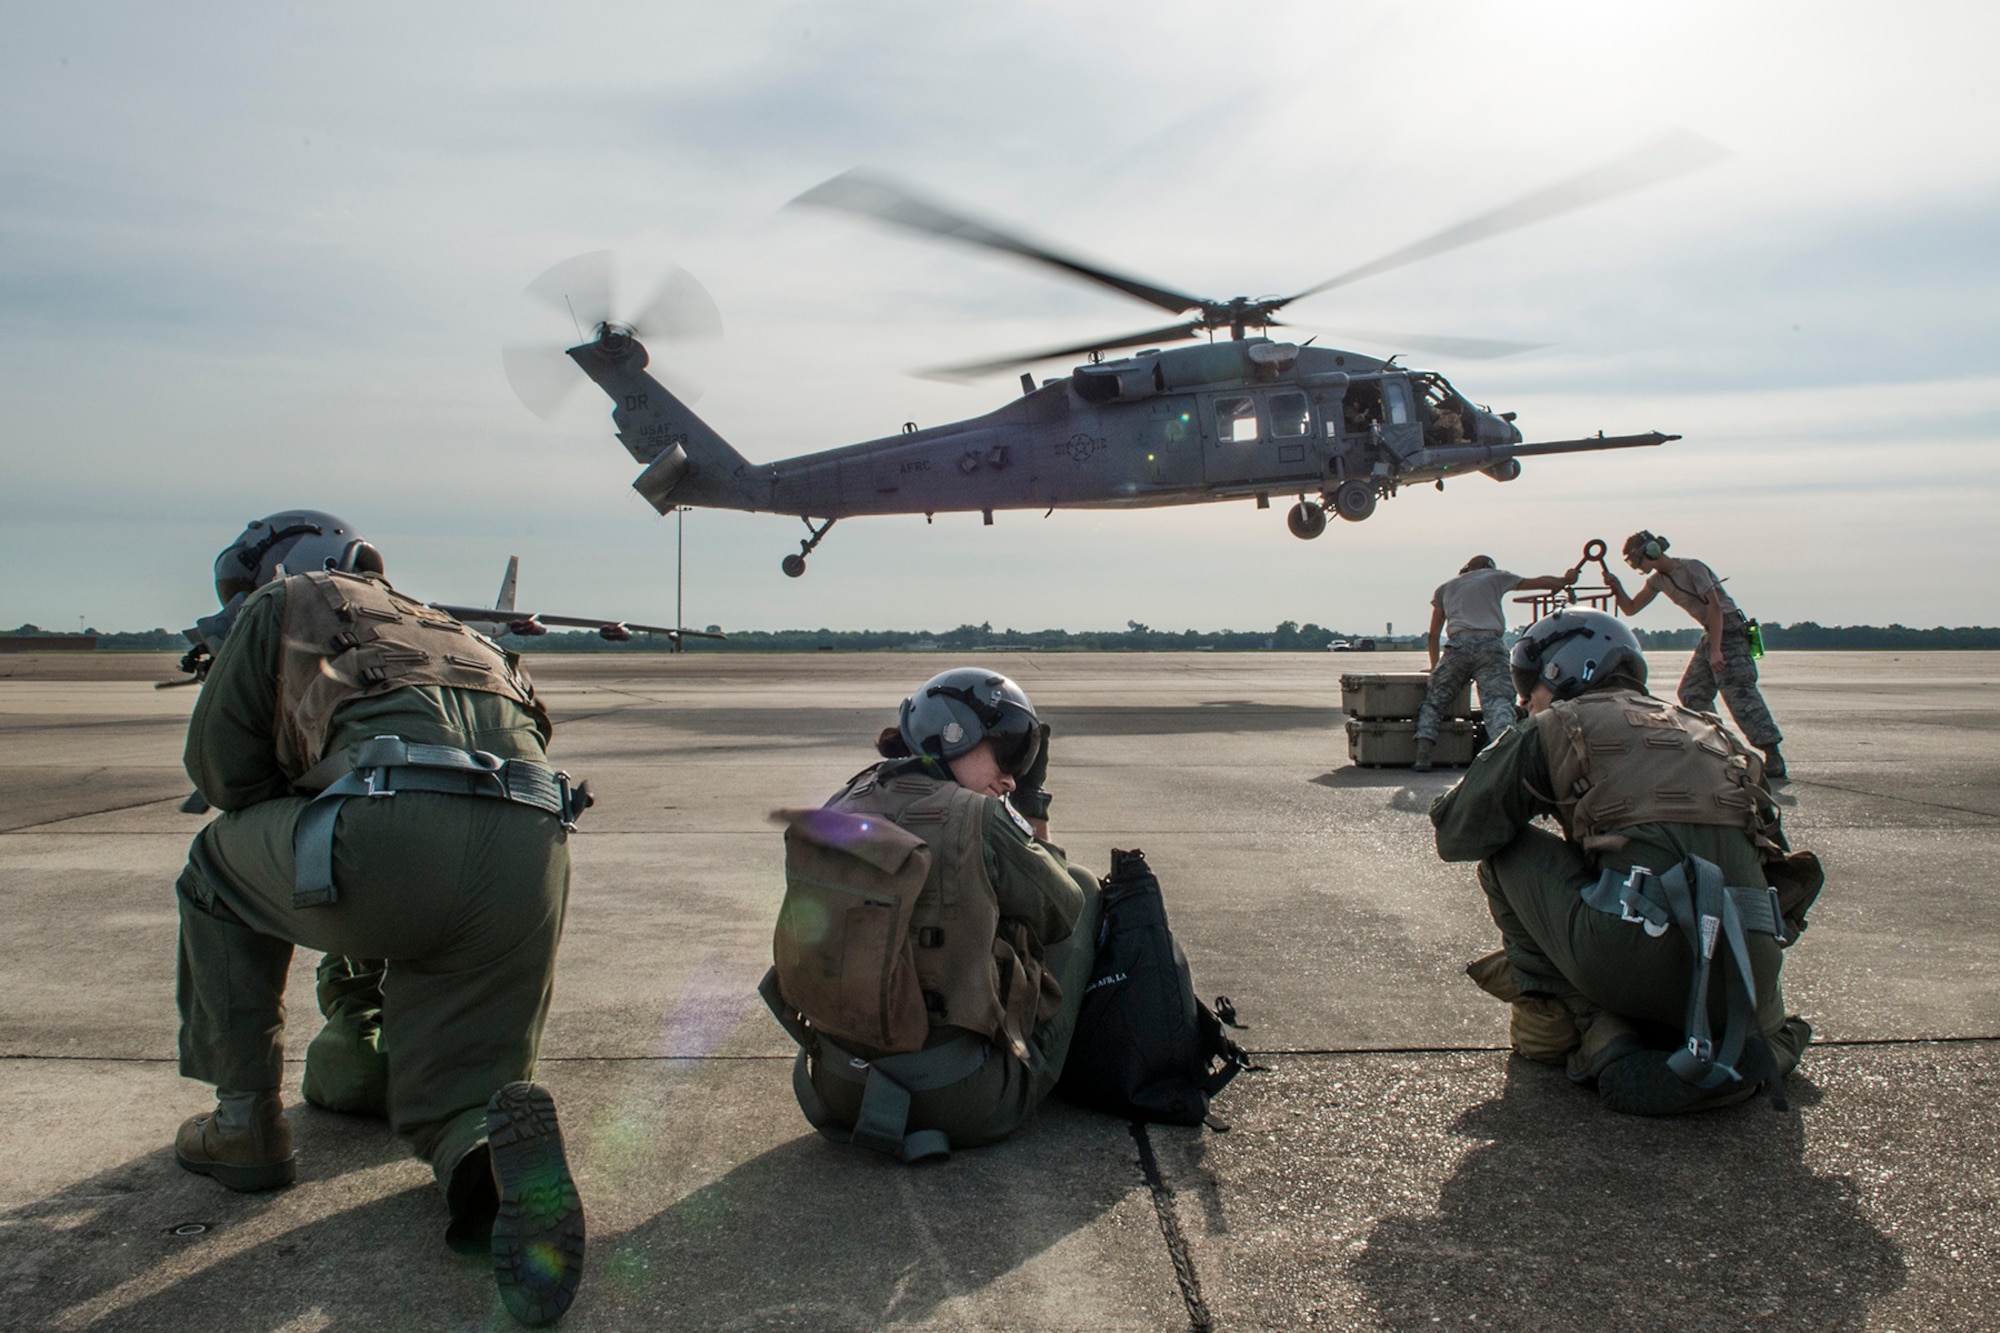 Three aircrew members of the 93rd Bomb Squadron await to board a 305th Rescue Squadron HH-60 Pave Hawk helicopter as part of Survival, Evasion, Resistance and Escape (SERE) training on May 14, 2015, Barksdale Air Force Base, La. SERE training gives aircrew the knowledge and tools necessary to survive on their own in any environment and under any condition should they have to abandon their aircraft. (U.S. Air Force photo by Master Sgt. Greg Steele/Released)